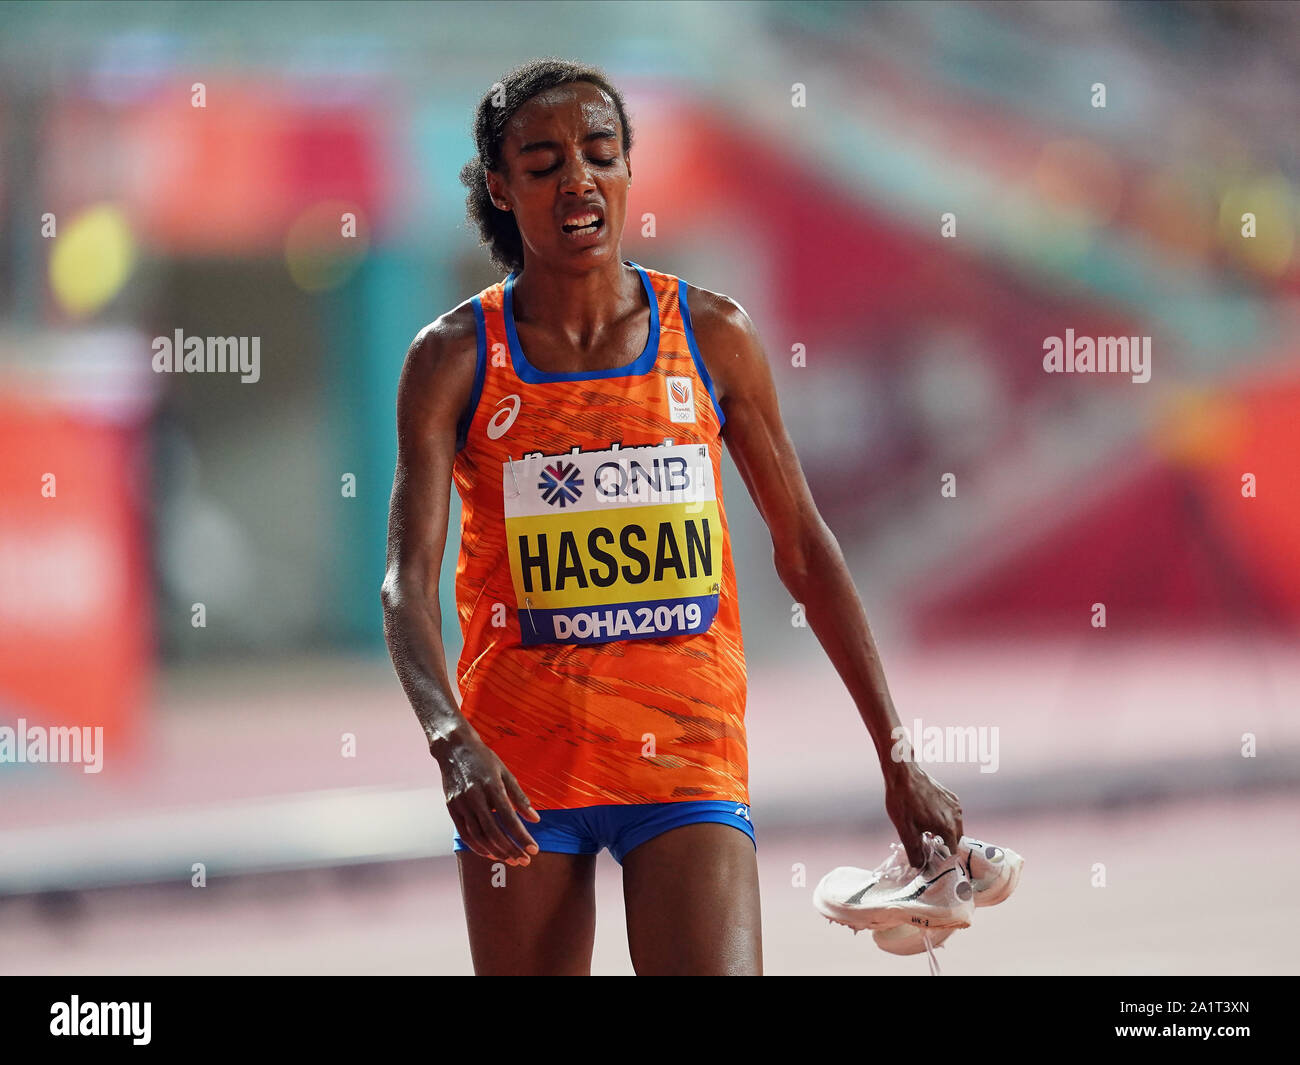 Page 2 - Sifan Hassan High Resolution Stock Photography and Images - Alamy